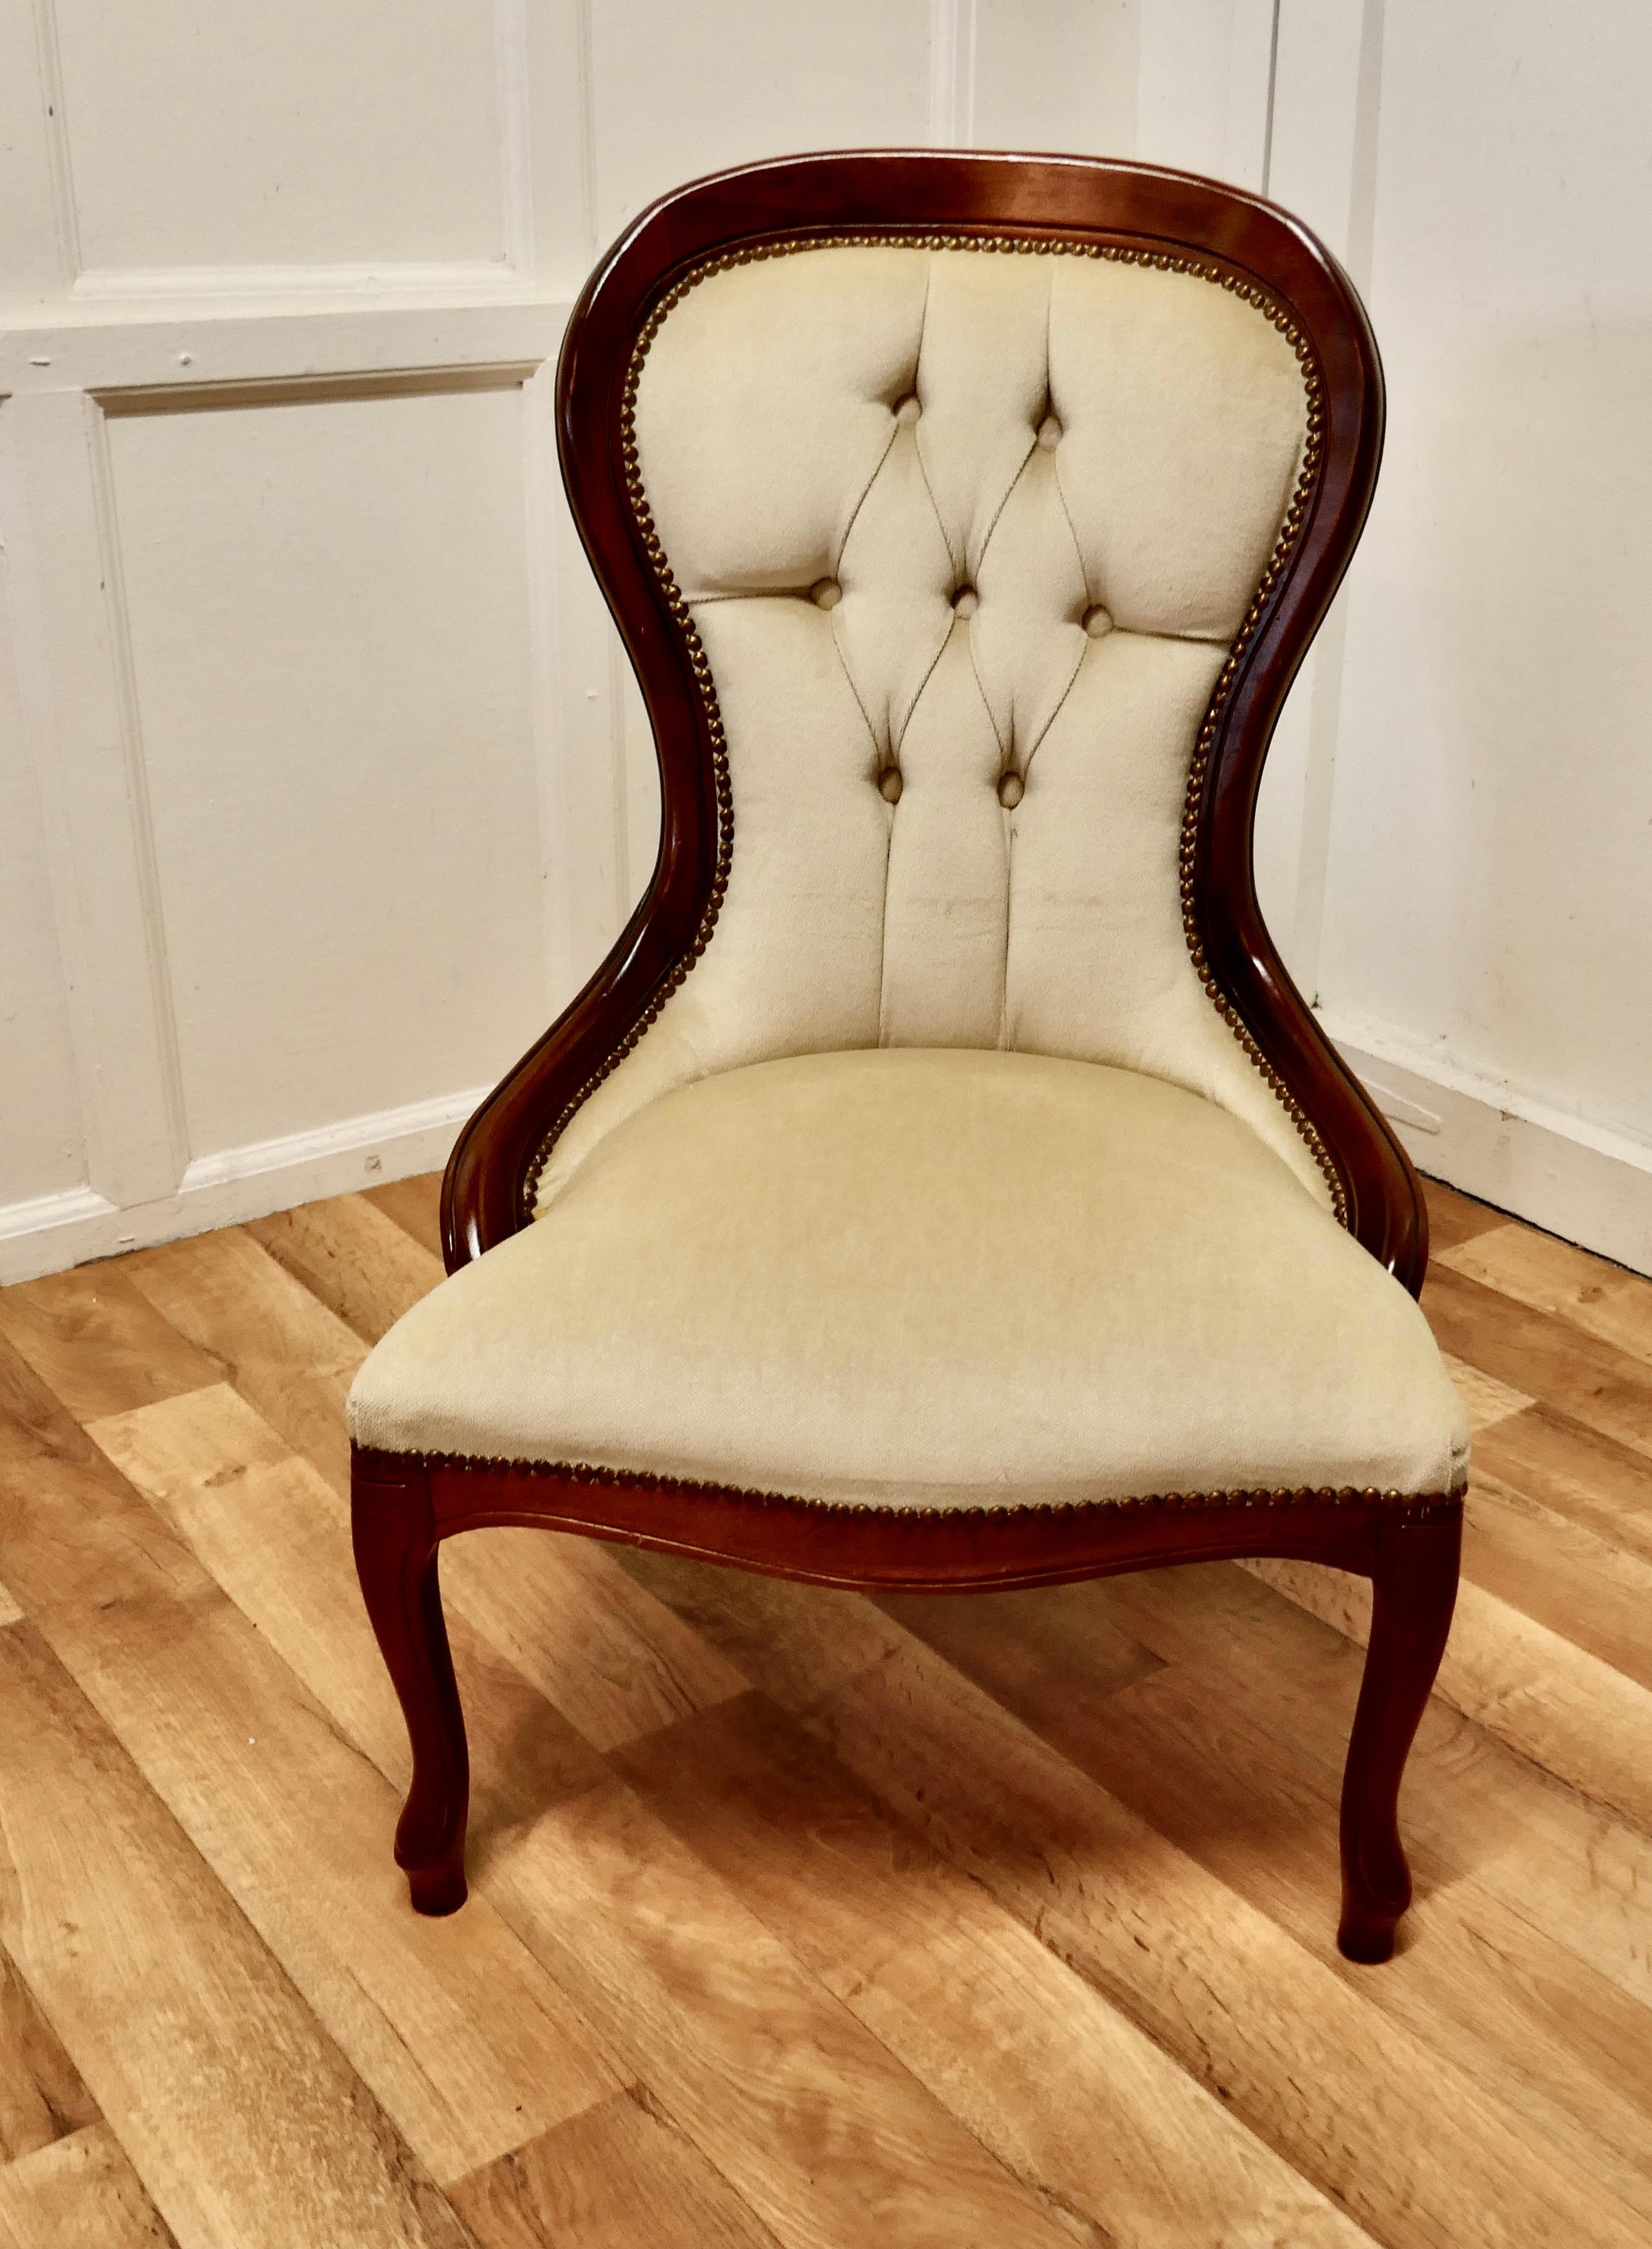 A Good Victorian Style Spoon Back Easy Chair

The chair has a solid frame and it stands on cabriole legs. There is a deeply buttoned back and a broad curved top rail. 
This very comfortable and roomy chair is upholstered with Ivory Coloured